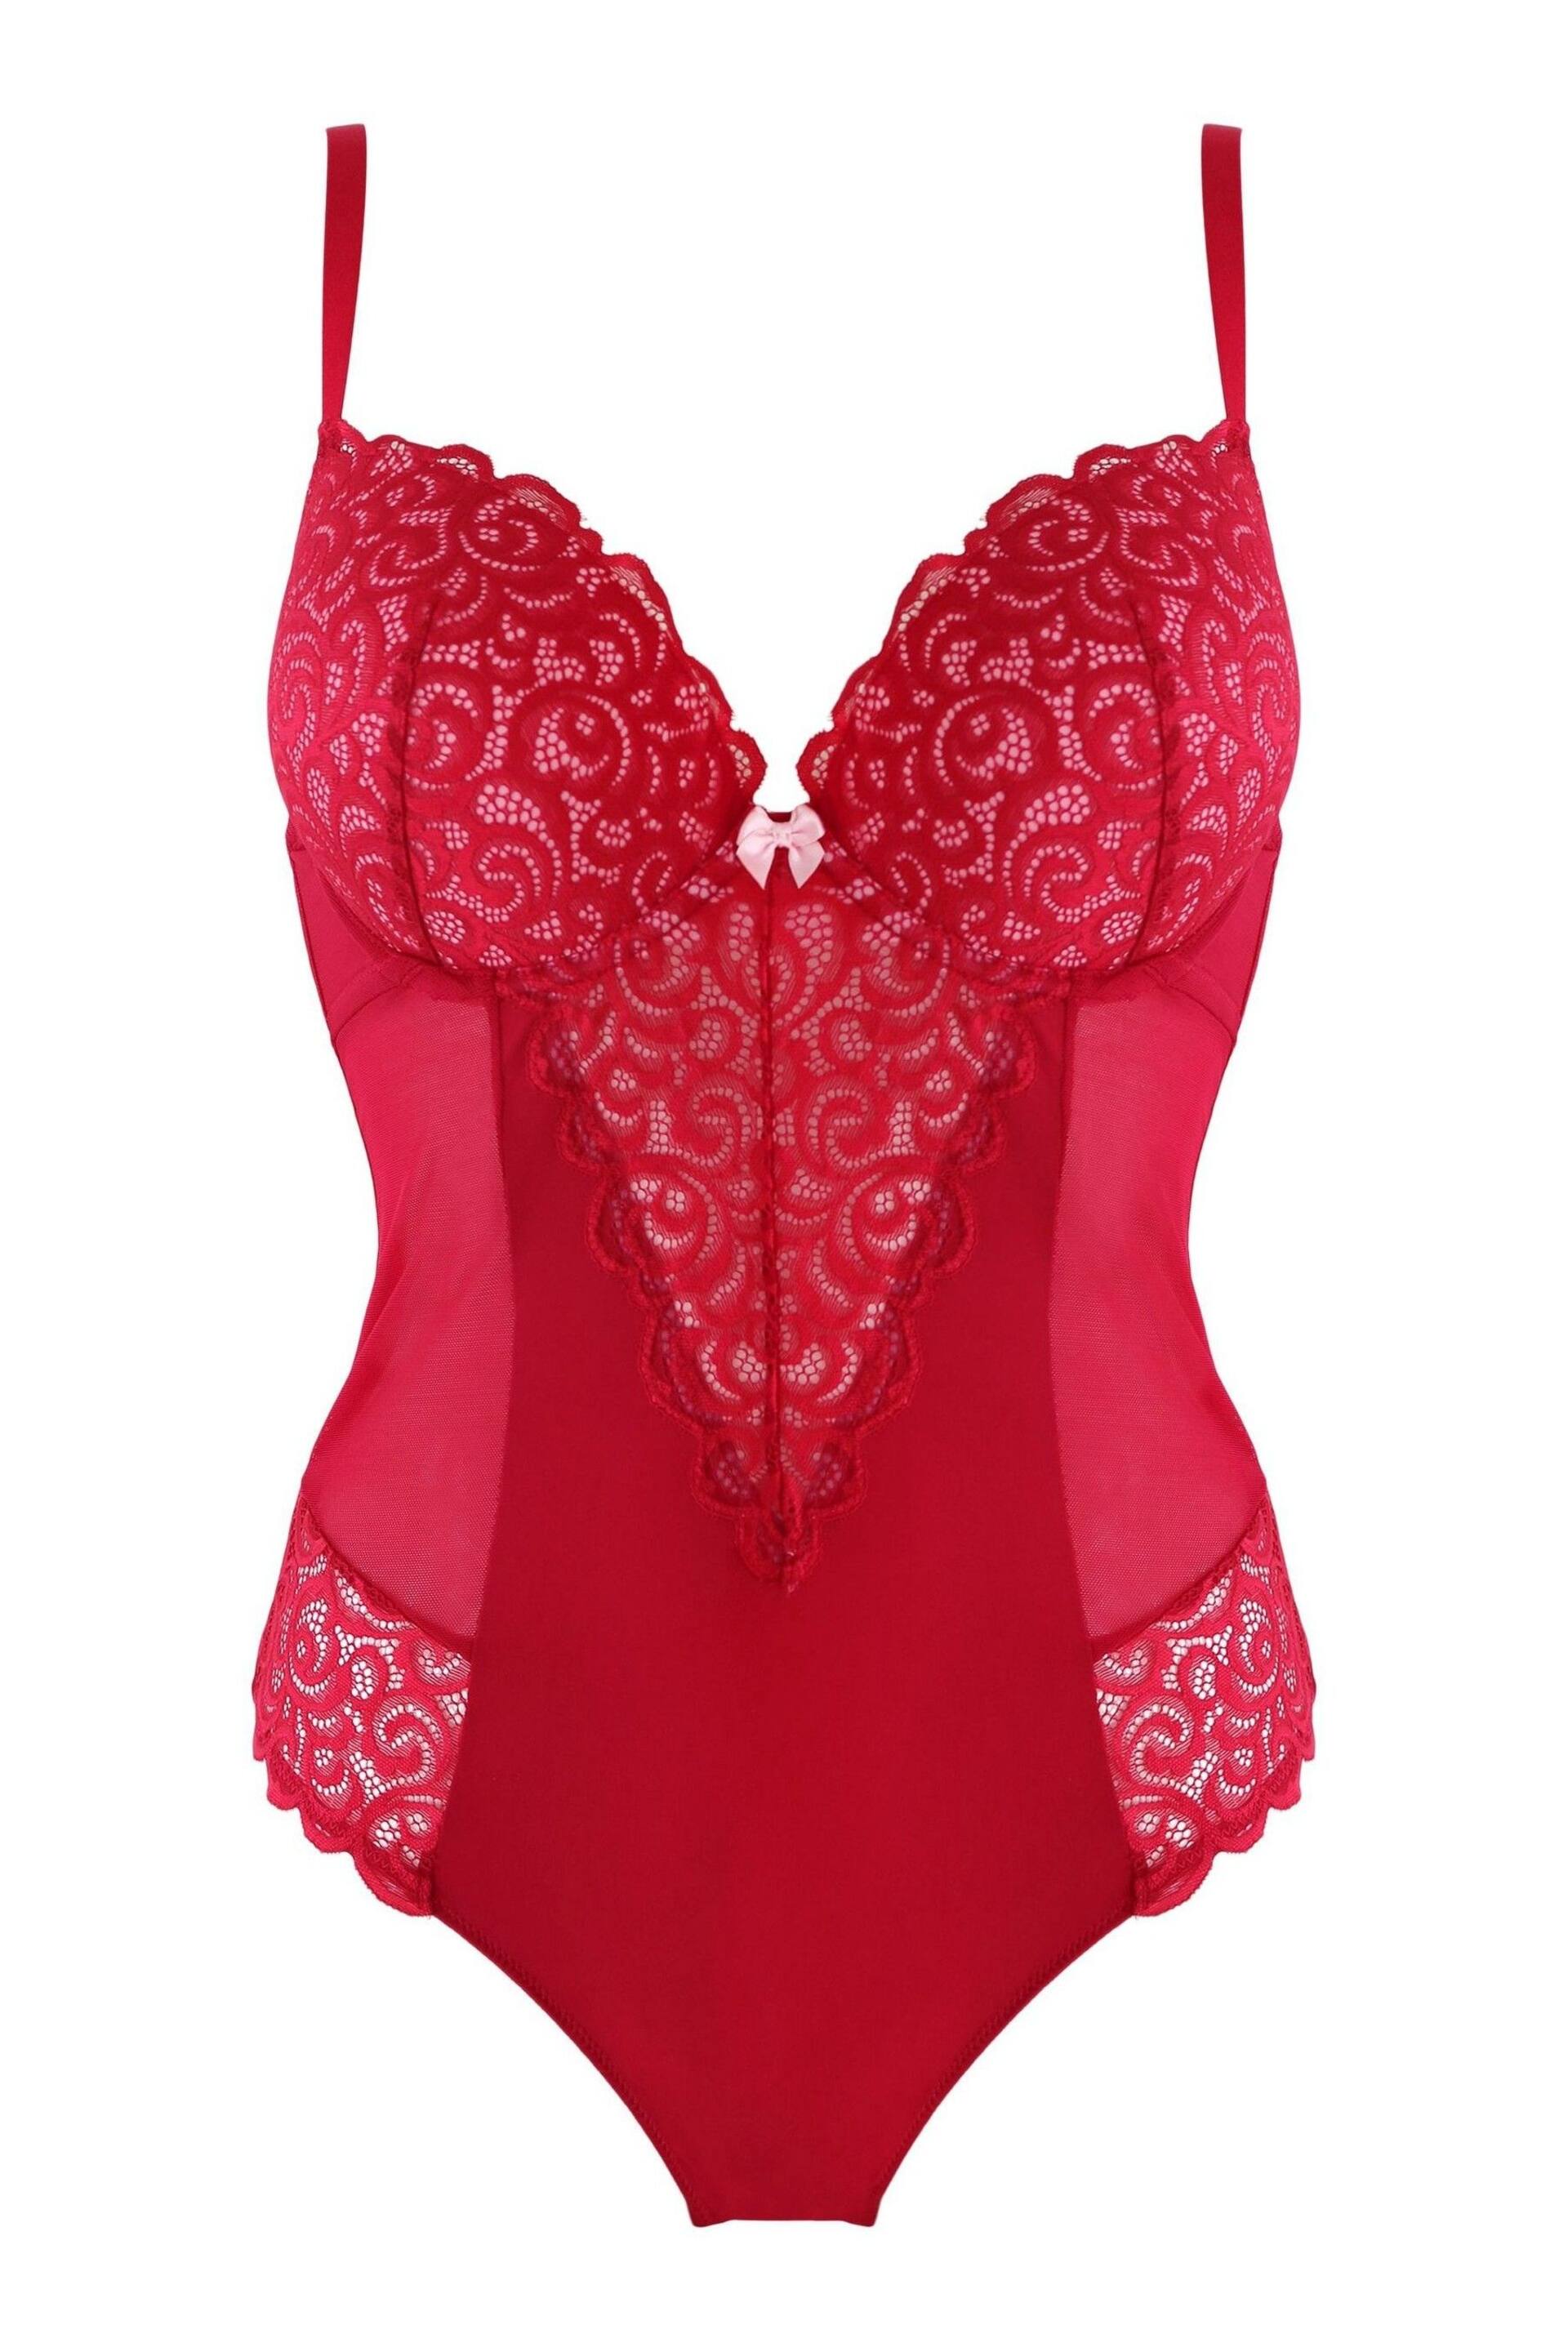 Pour Moi Red Romance Padded Push Up Body - Image 6 of 7